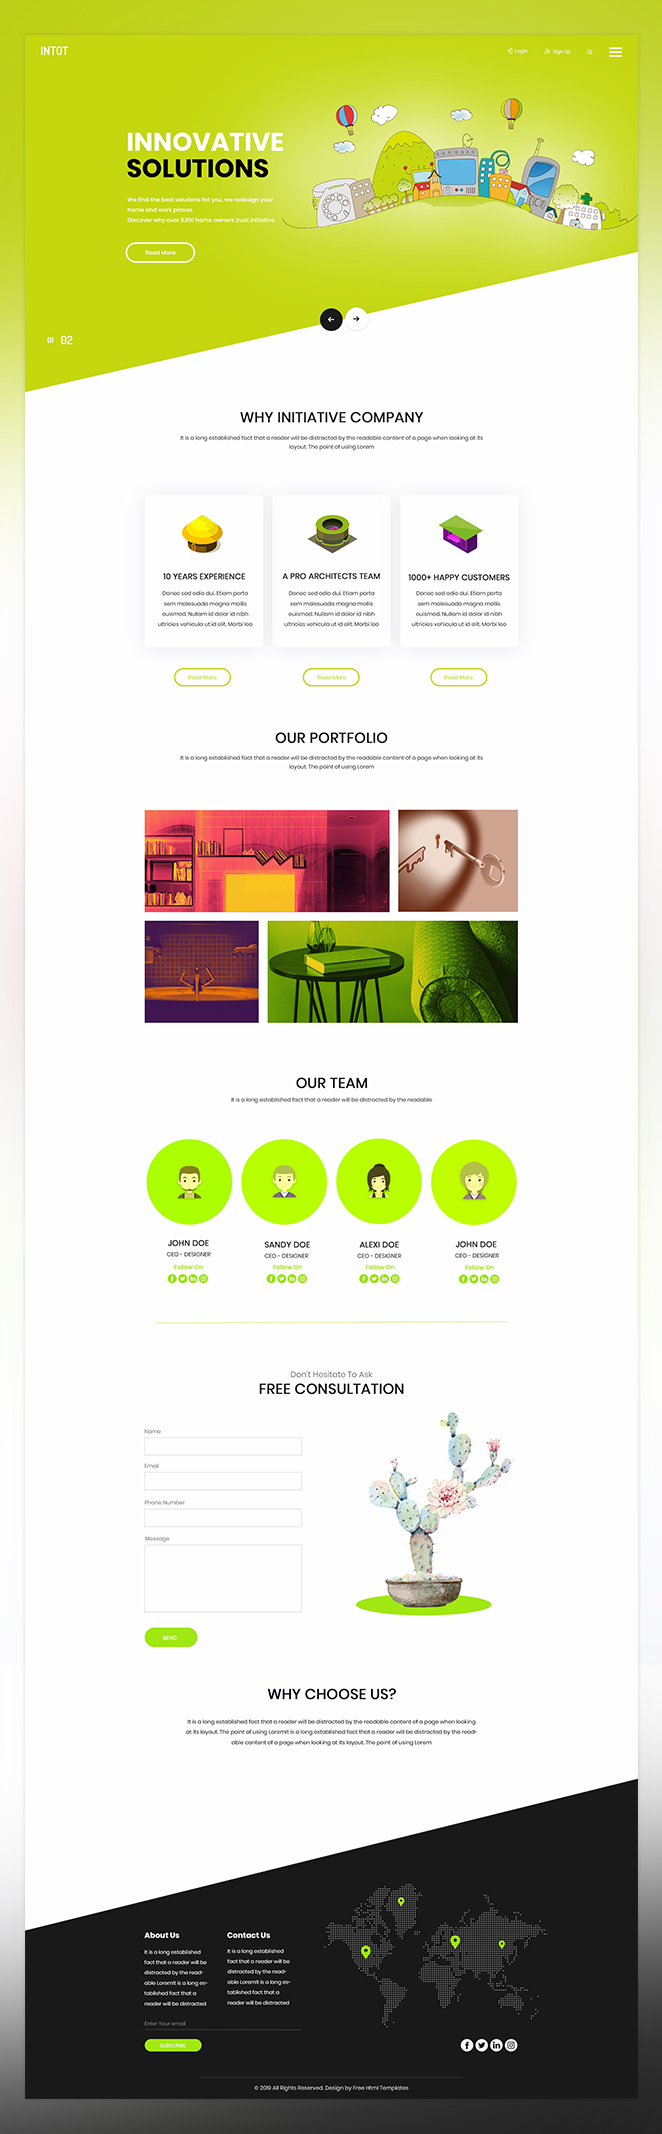 Intot architecture website psd template